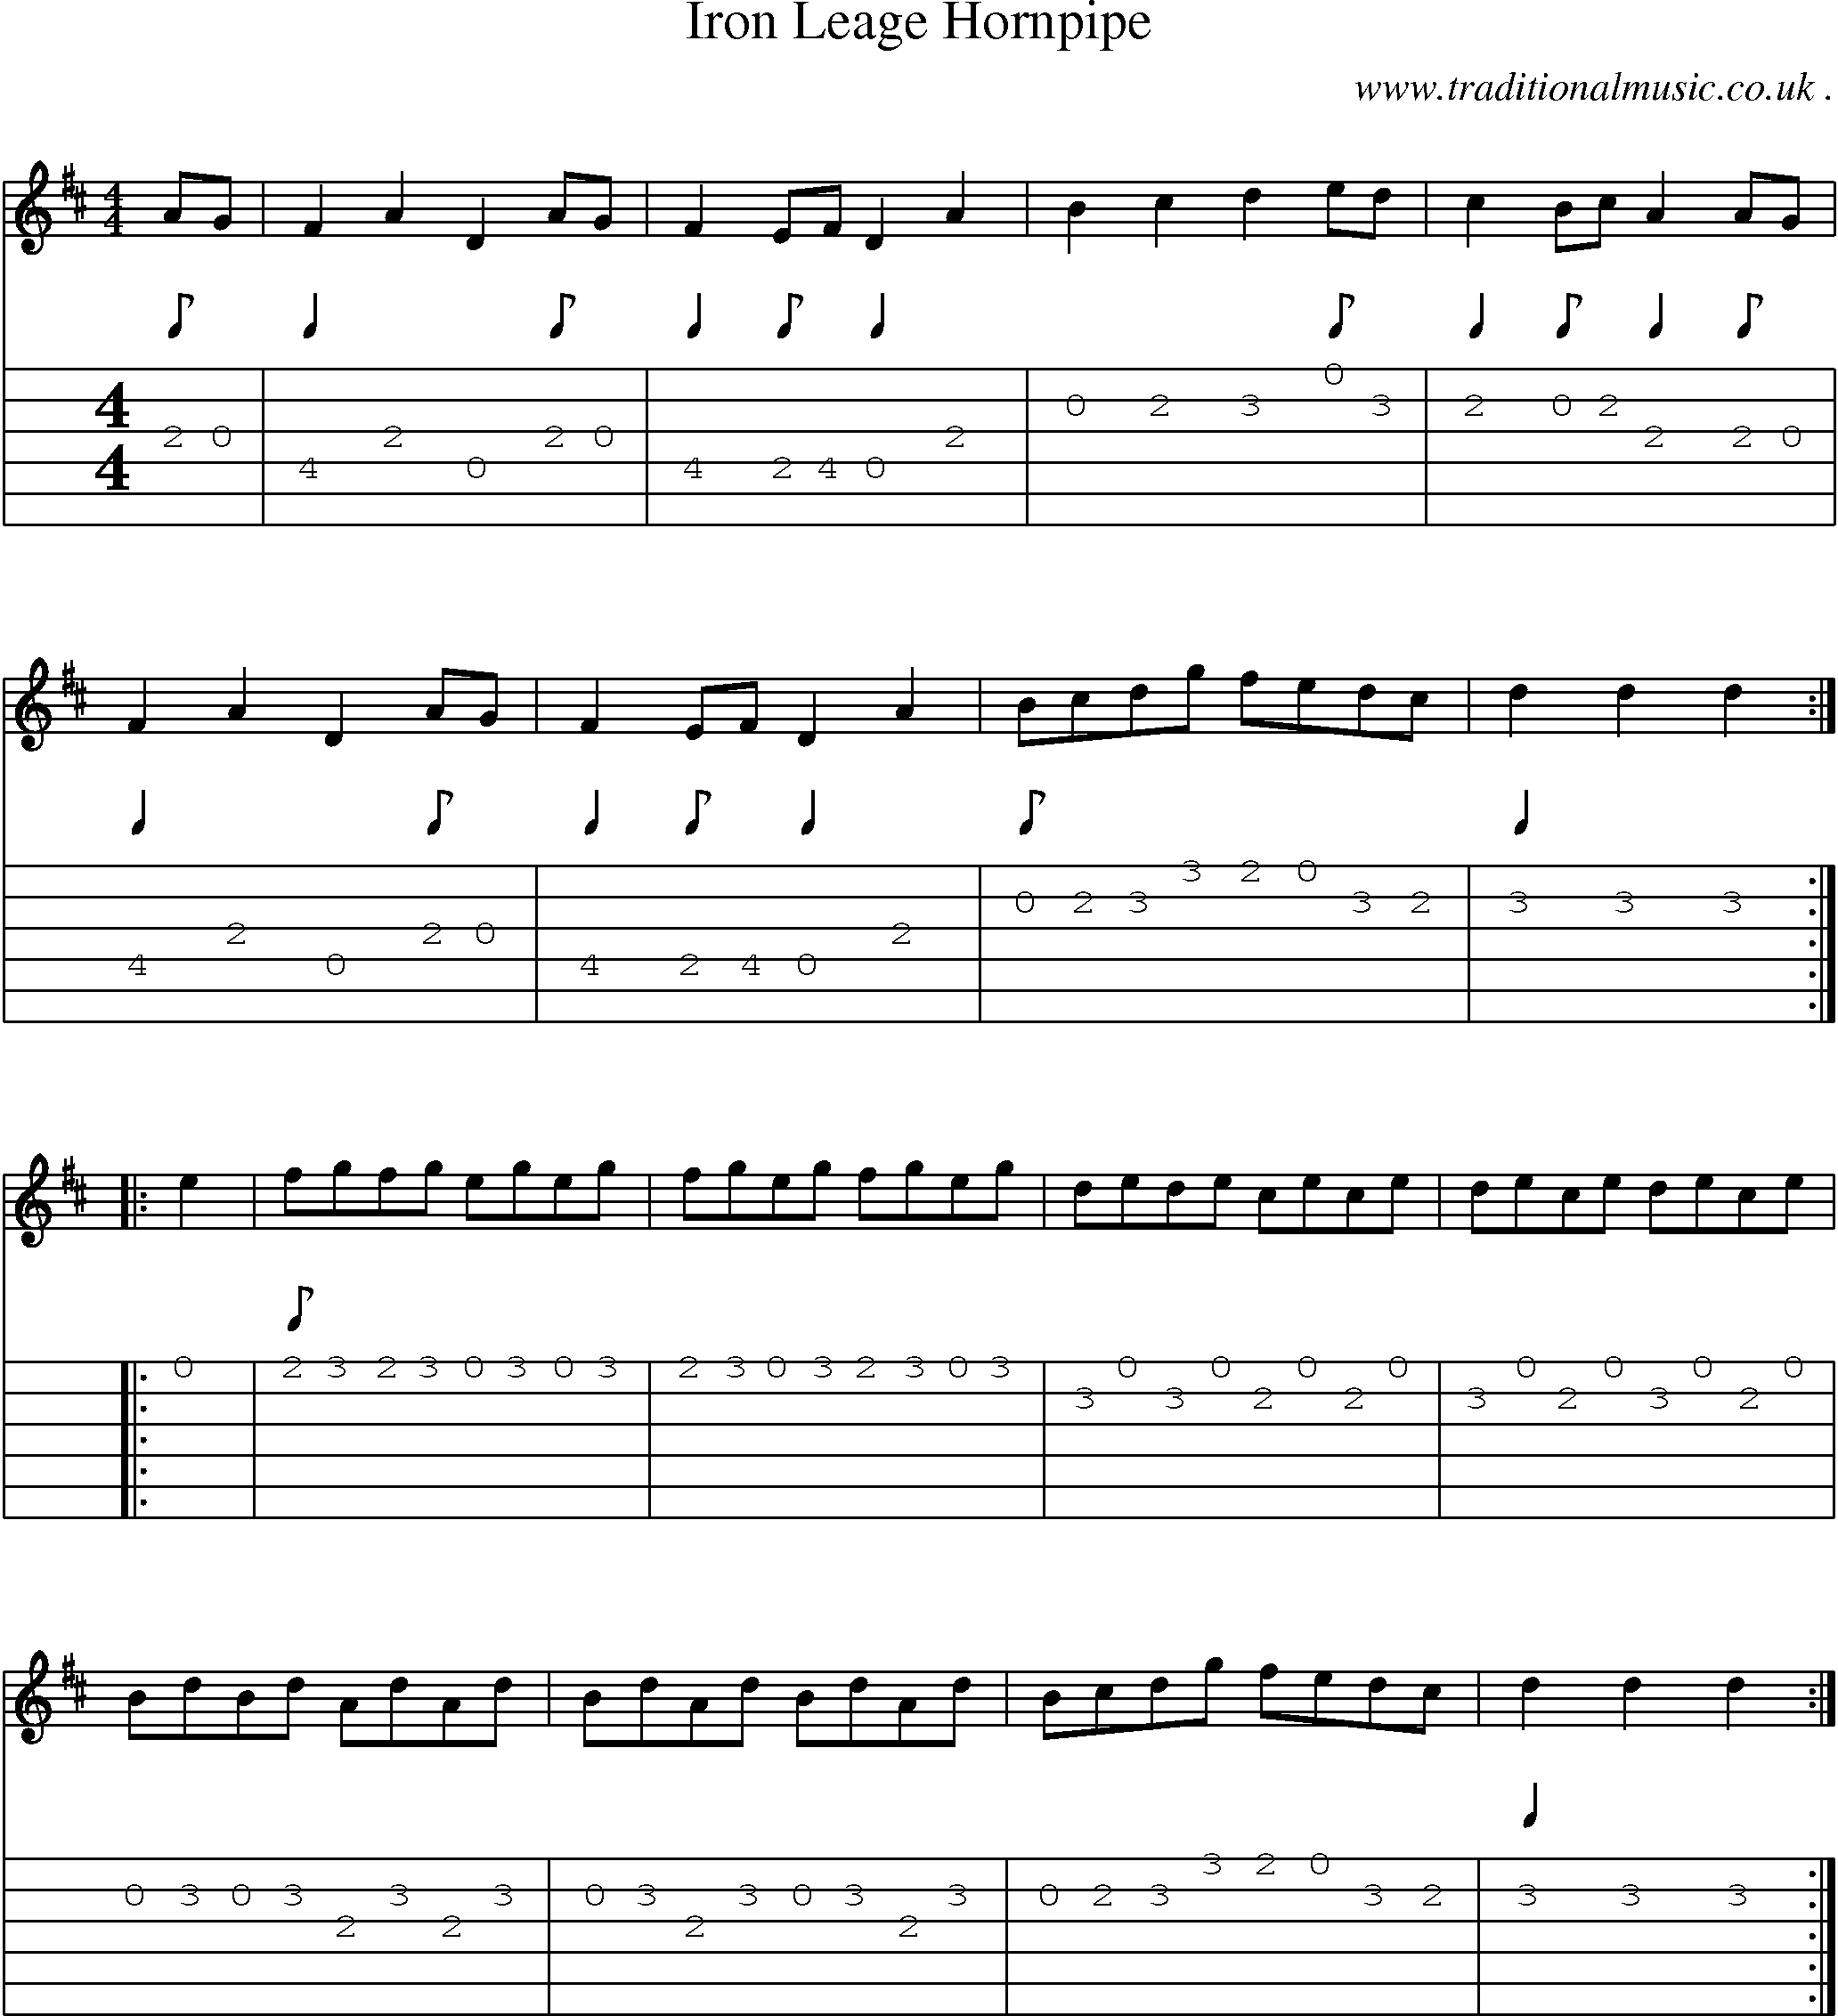 Sheet-Music and Guitar Tabs for Iron Leage Hornpipe